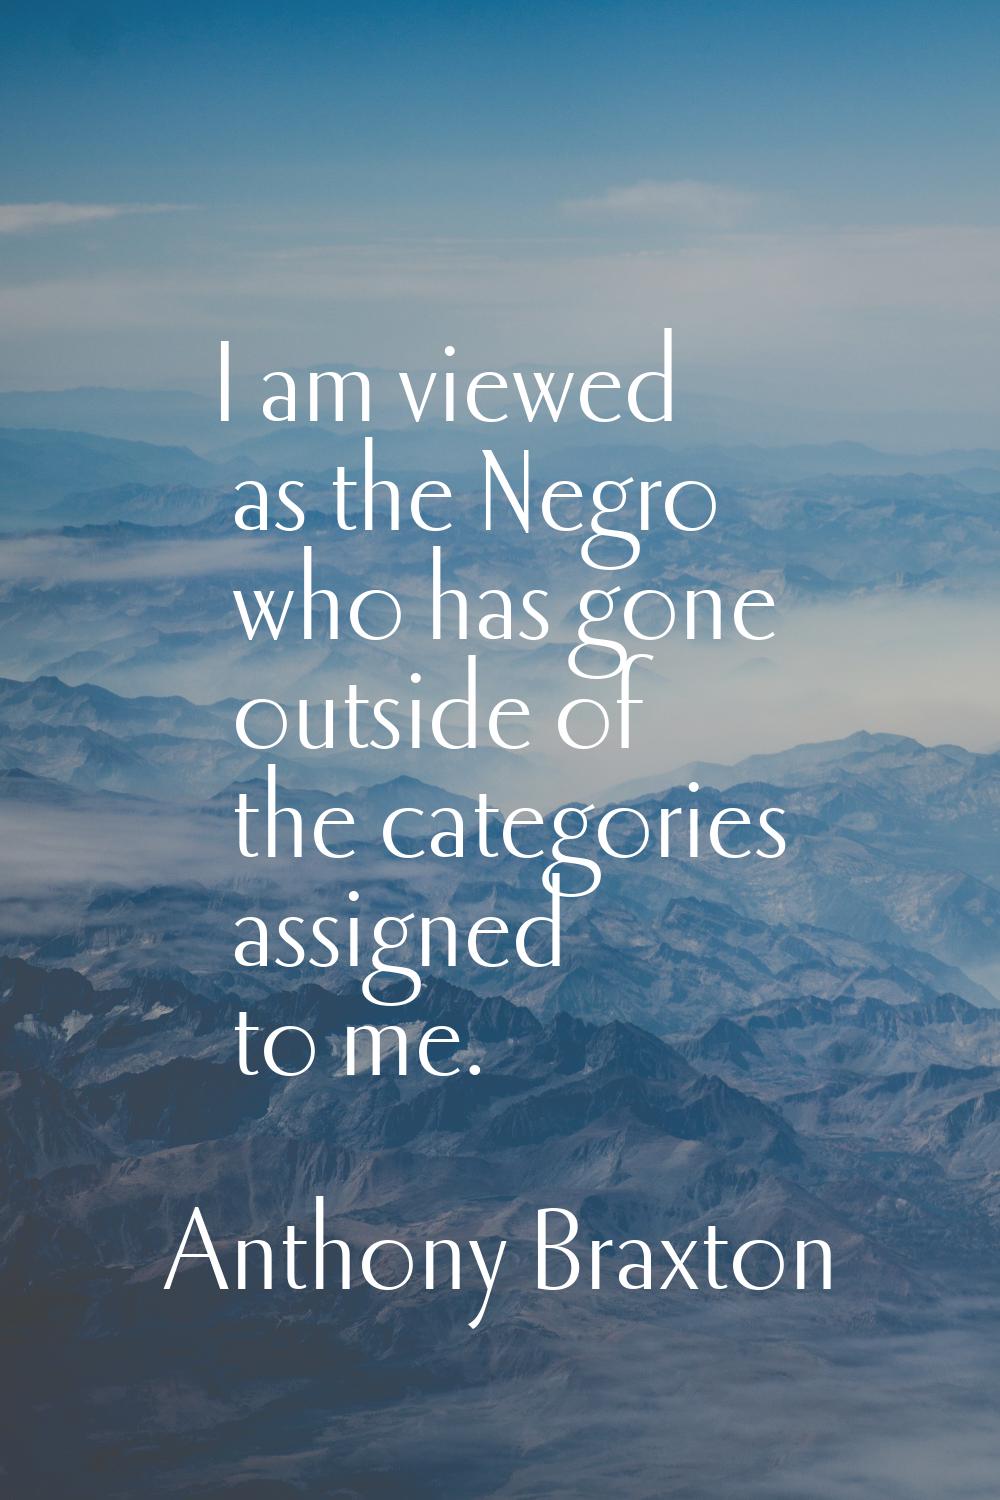 I am viewed as the Negro who has gone outside of the categories assigned to me.